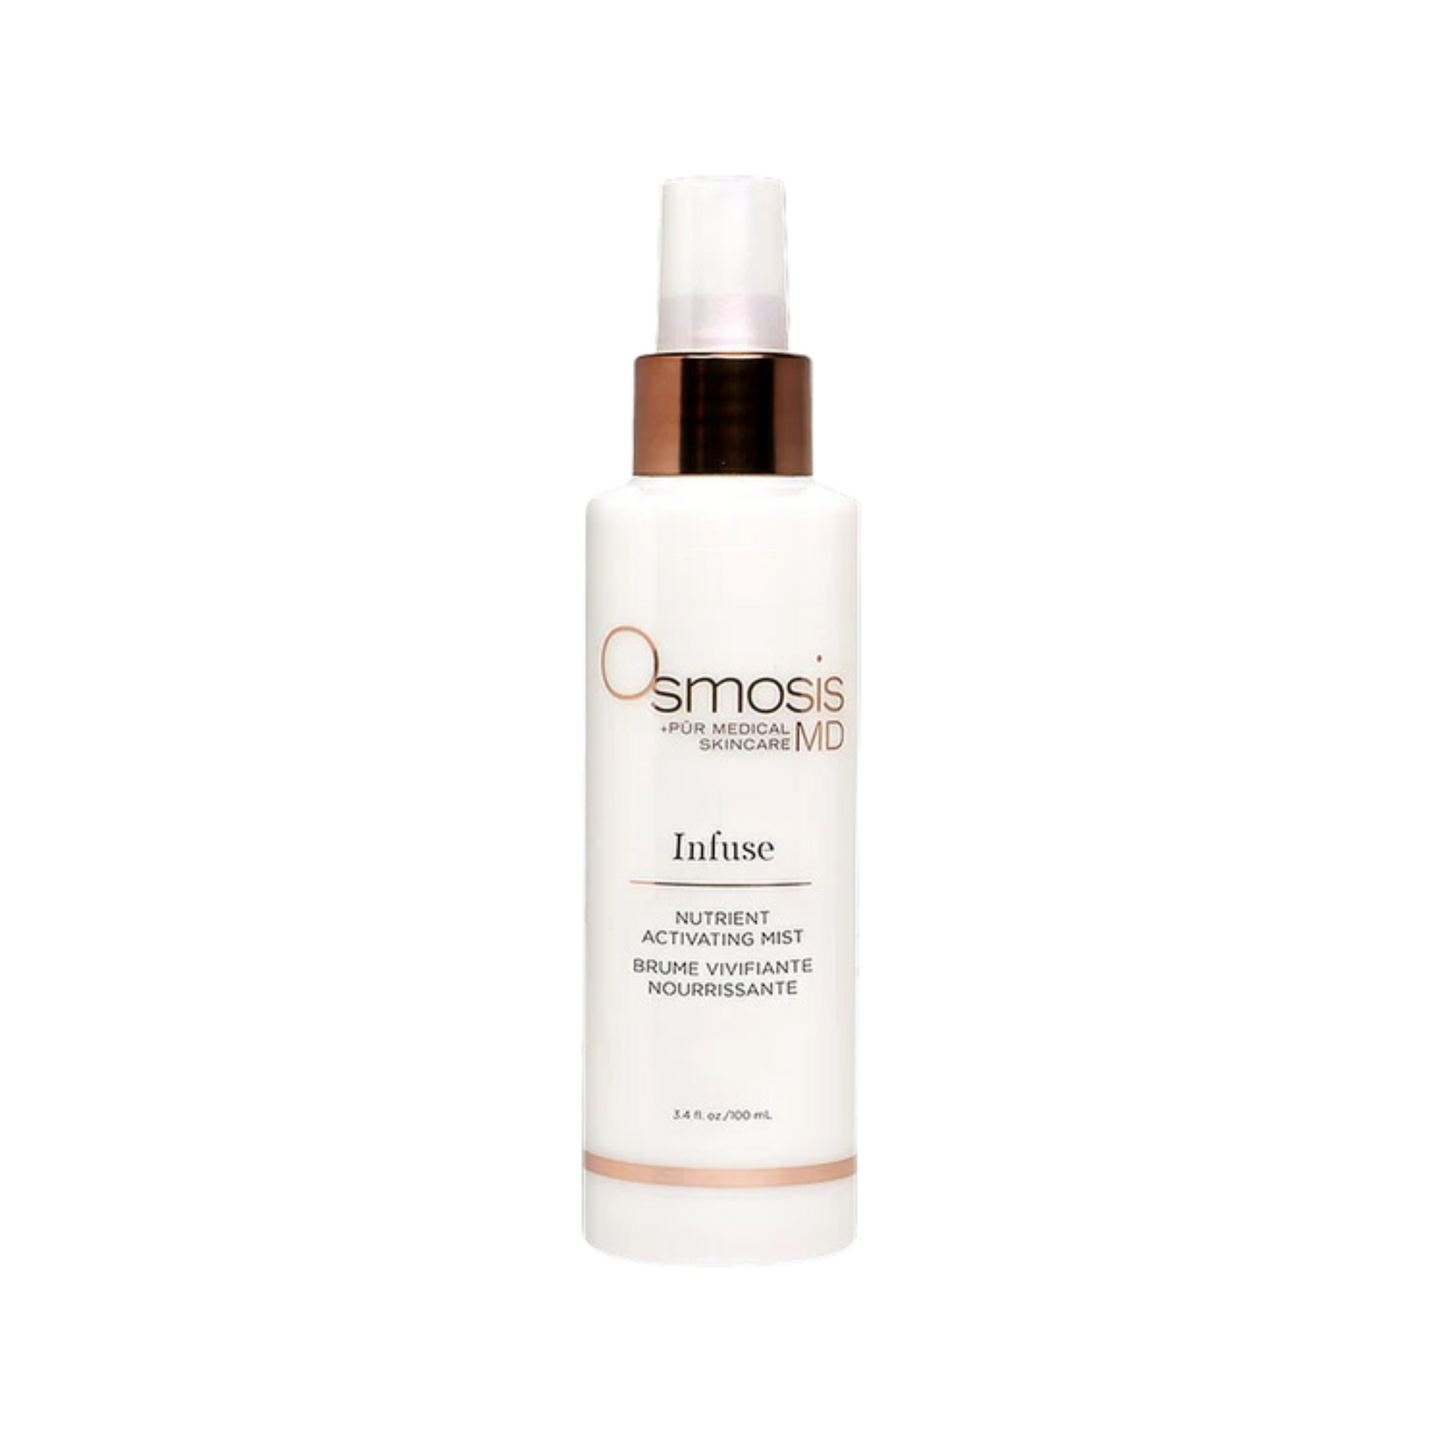 Osmosis Beauty - Infuse Activating Mist